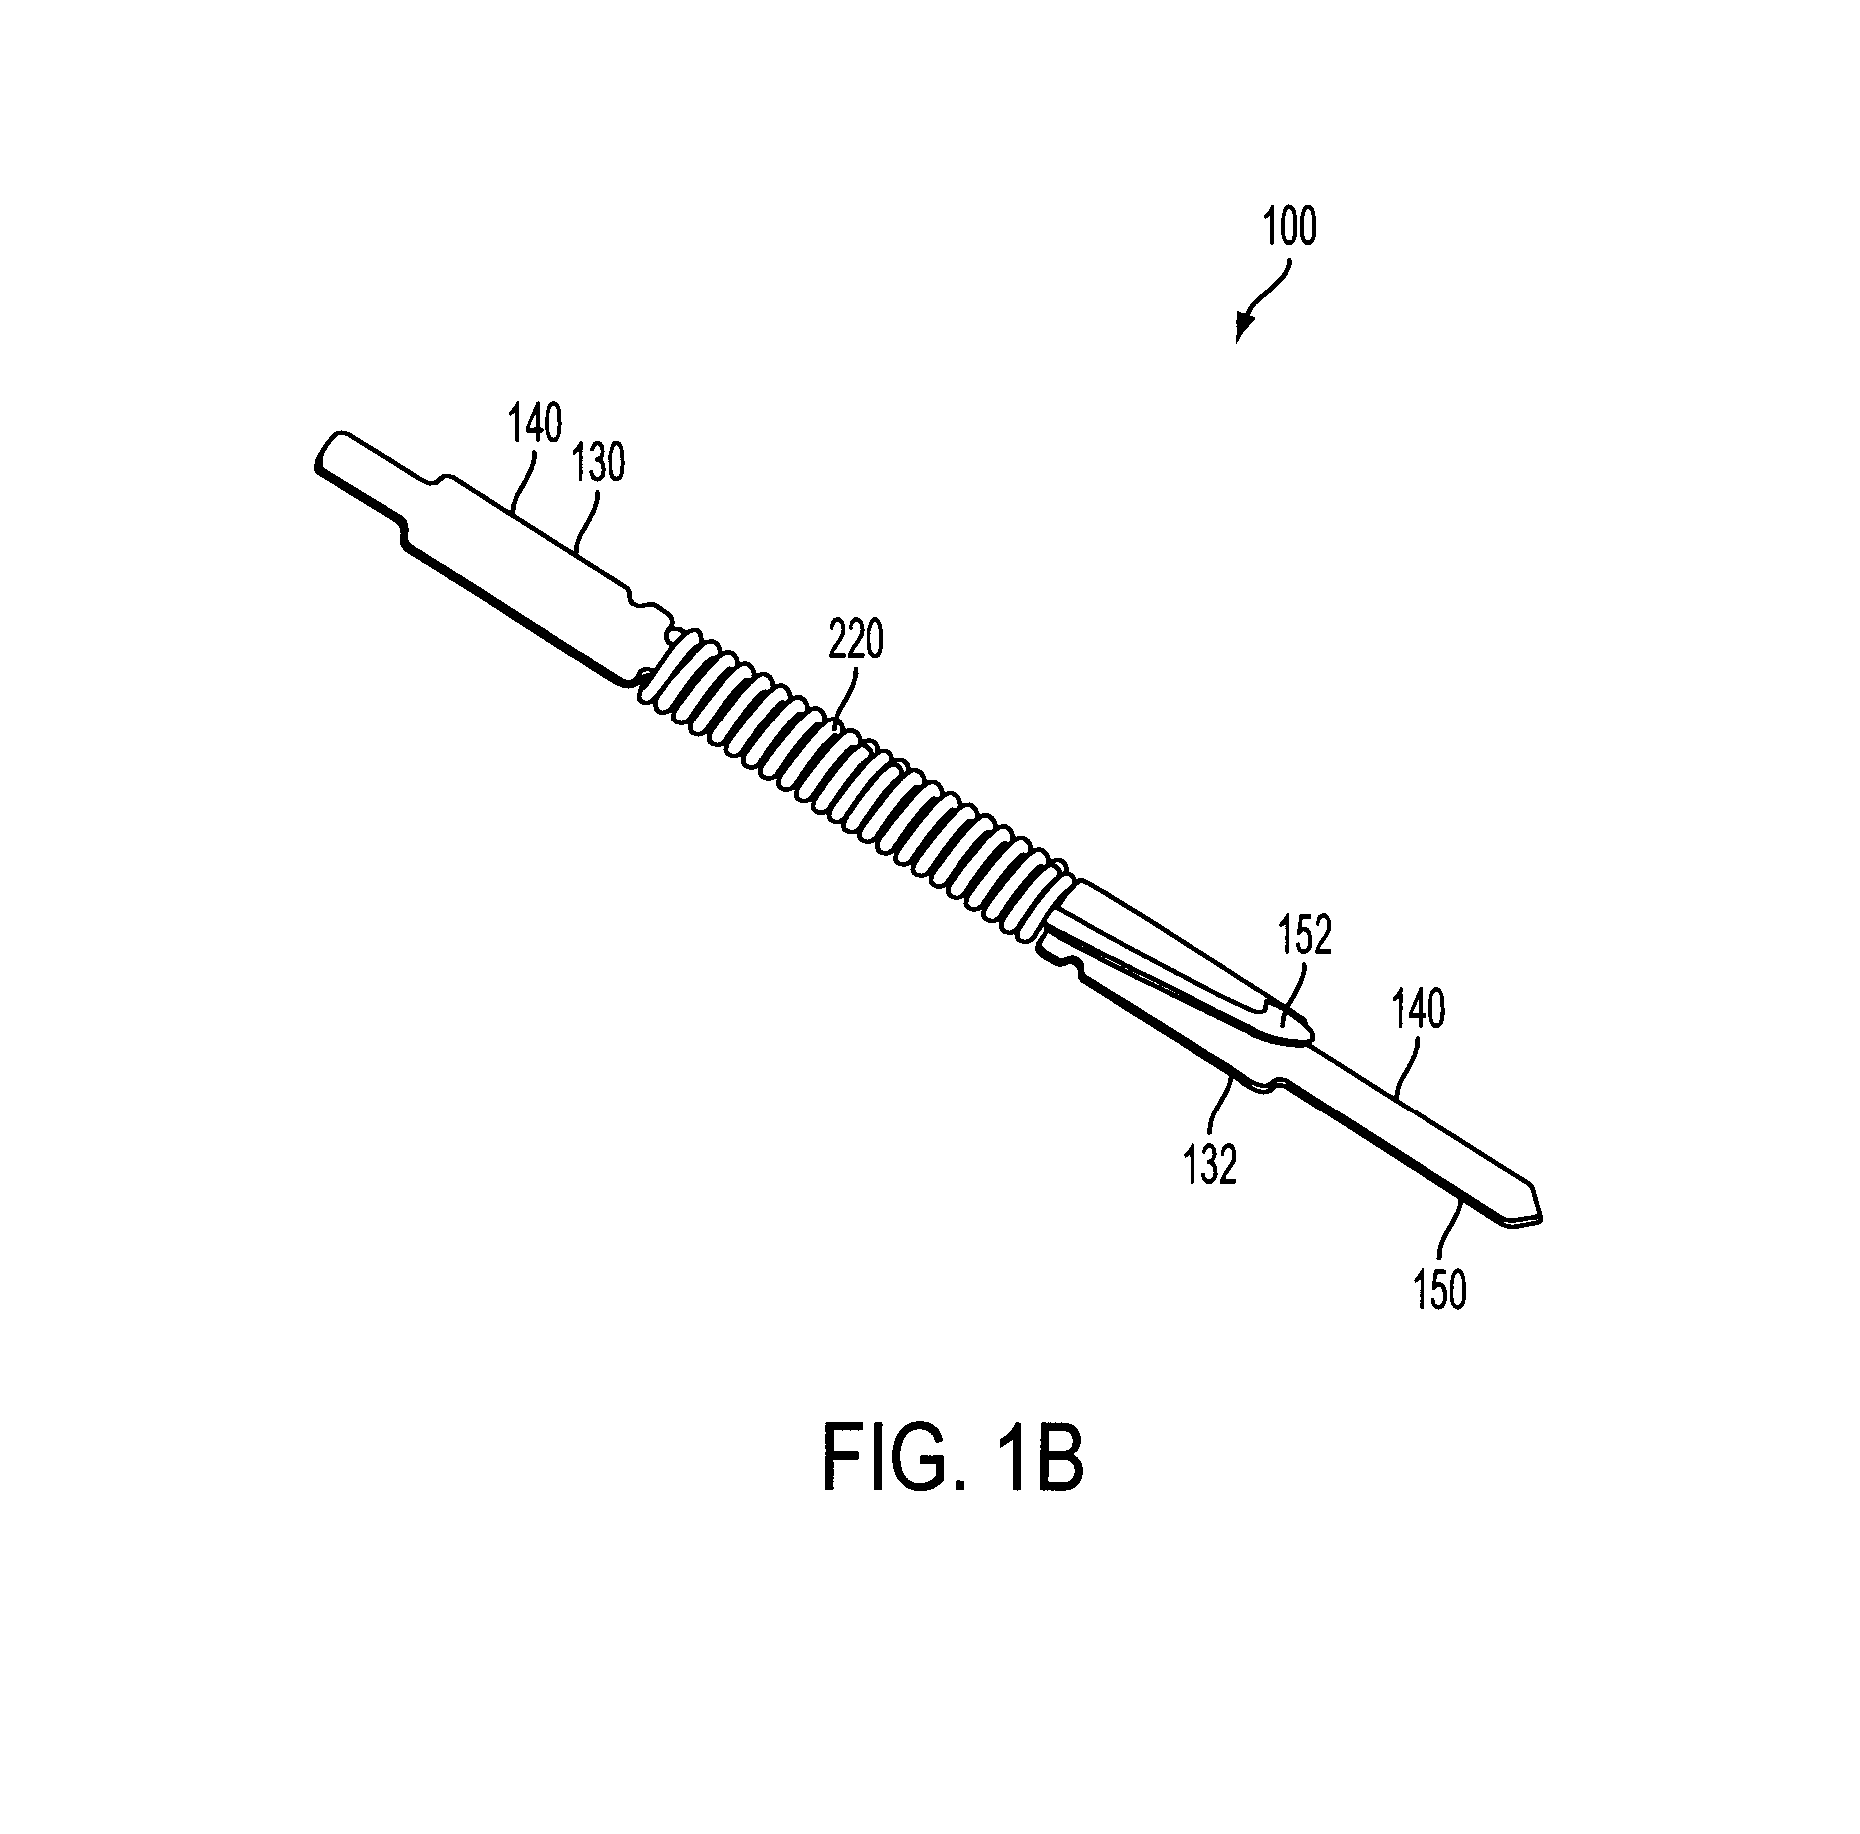 Test probe assembly and related methods